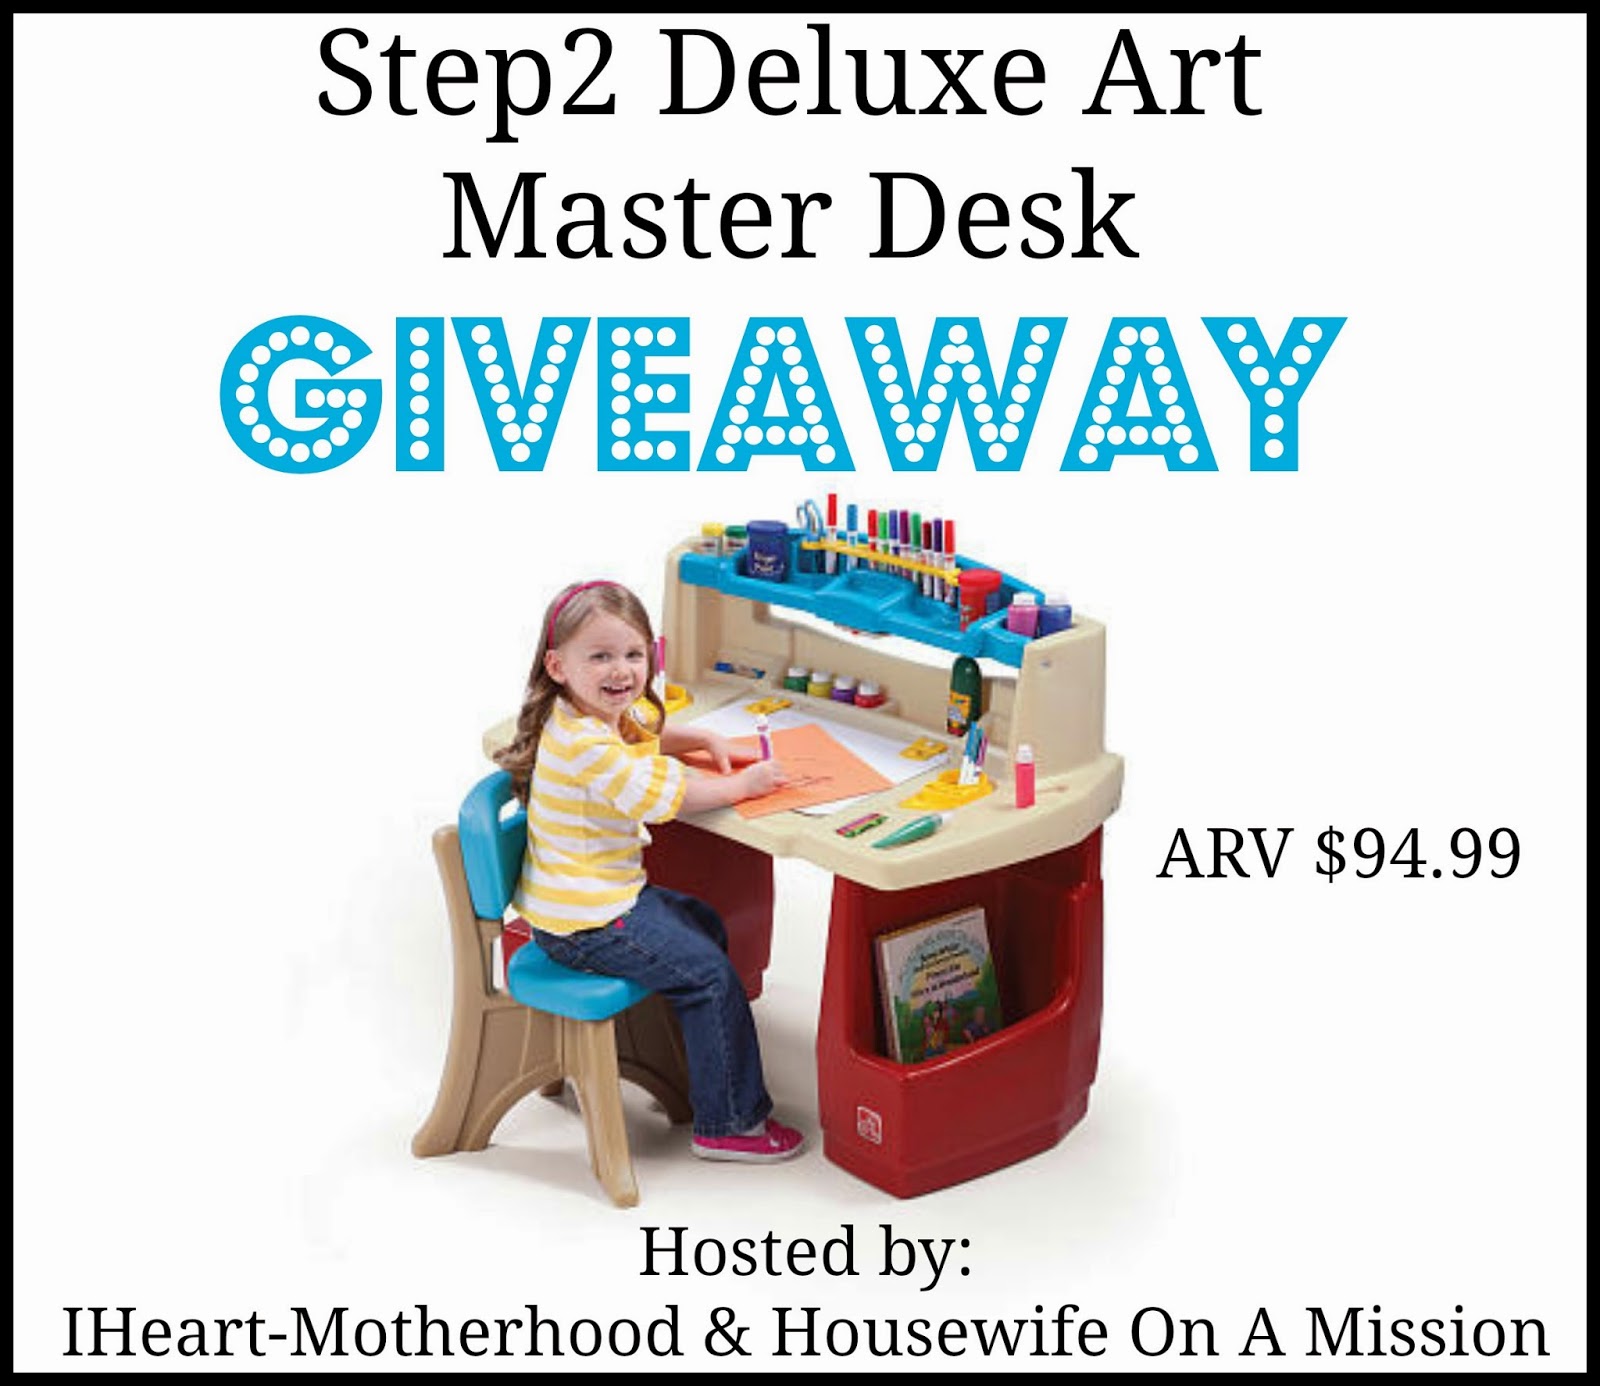 Step 2 Deluxe Art Master Desk Giveaway Ends 10 29 Everything